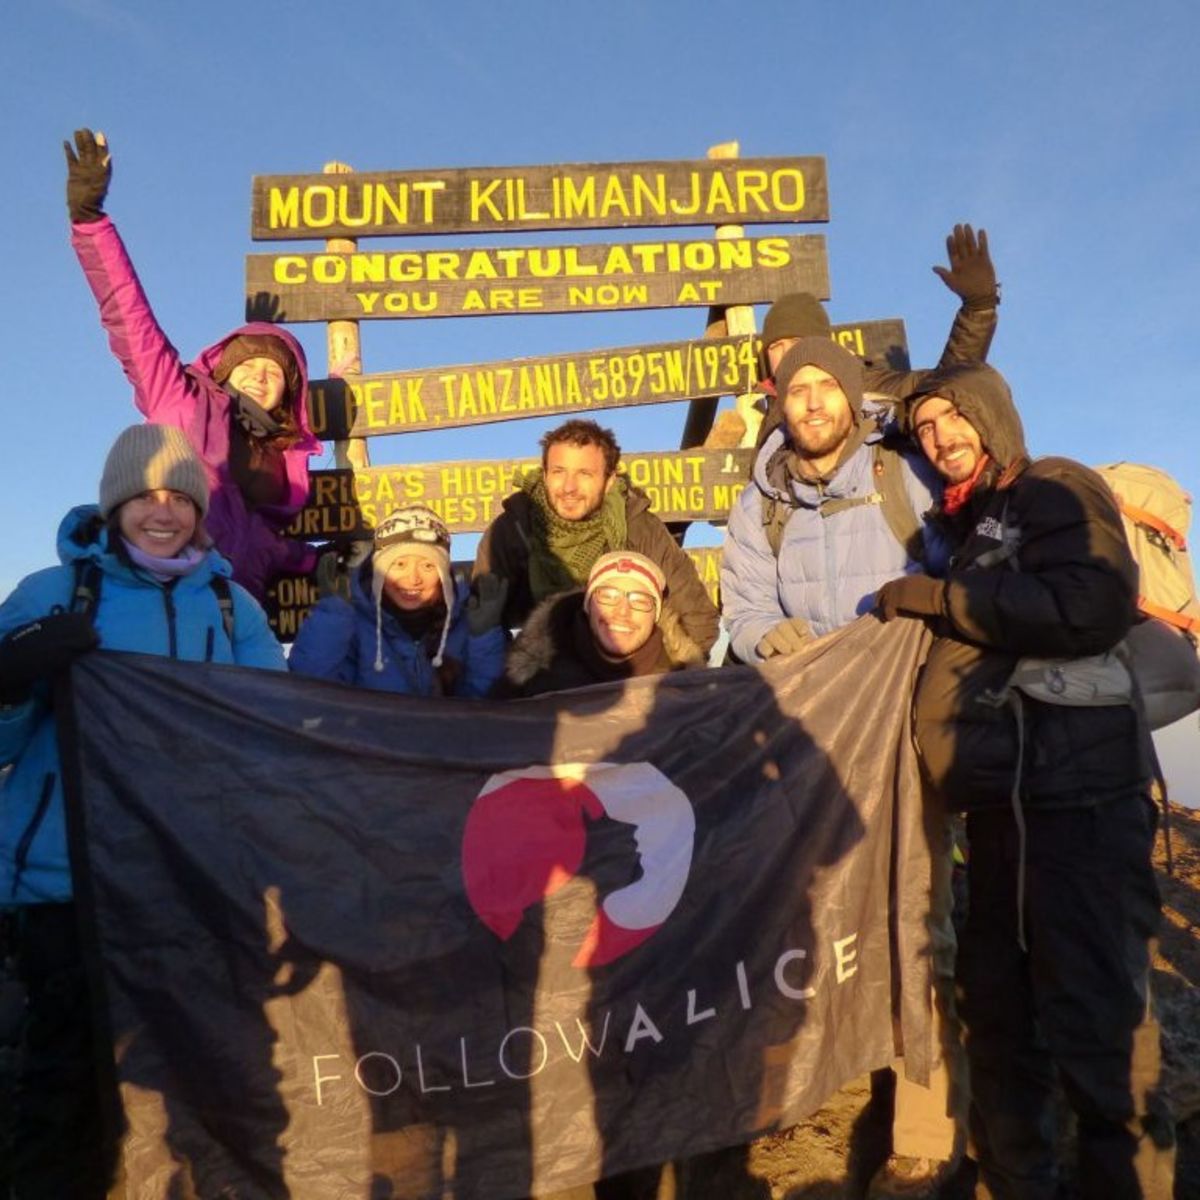 Group photo at Uhuru Peak on a sunny day with the Follow Alice flag